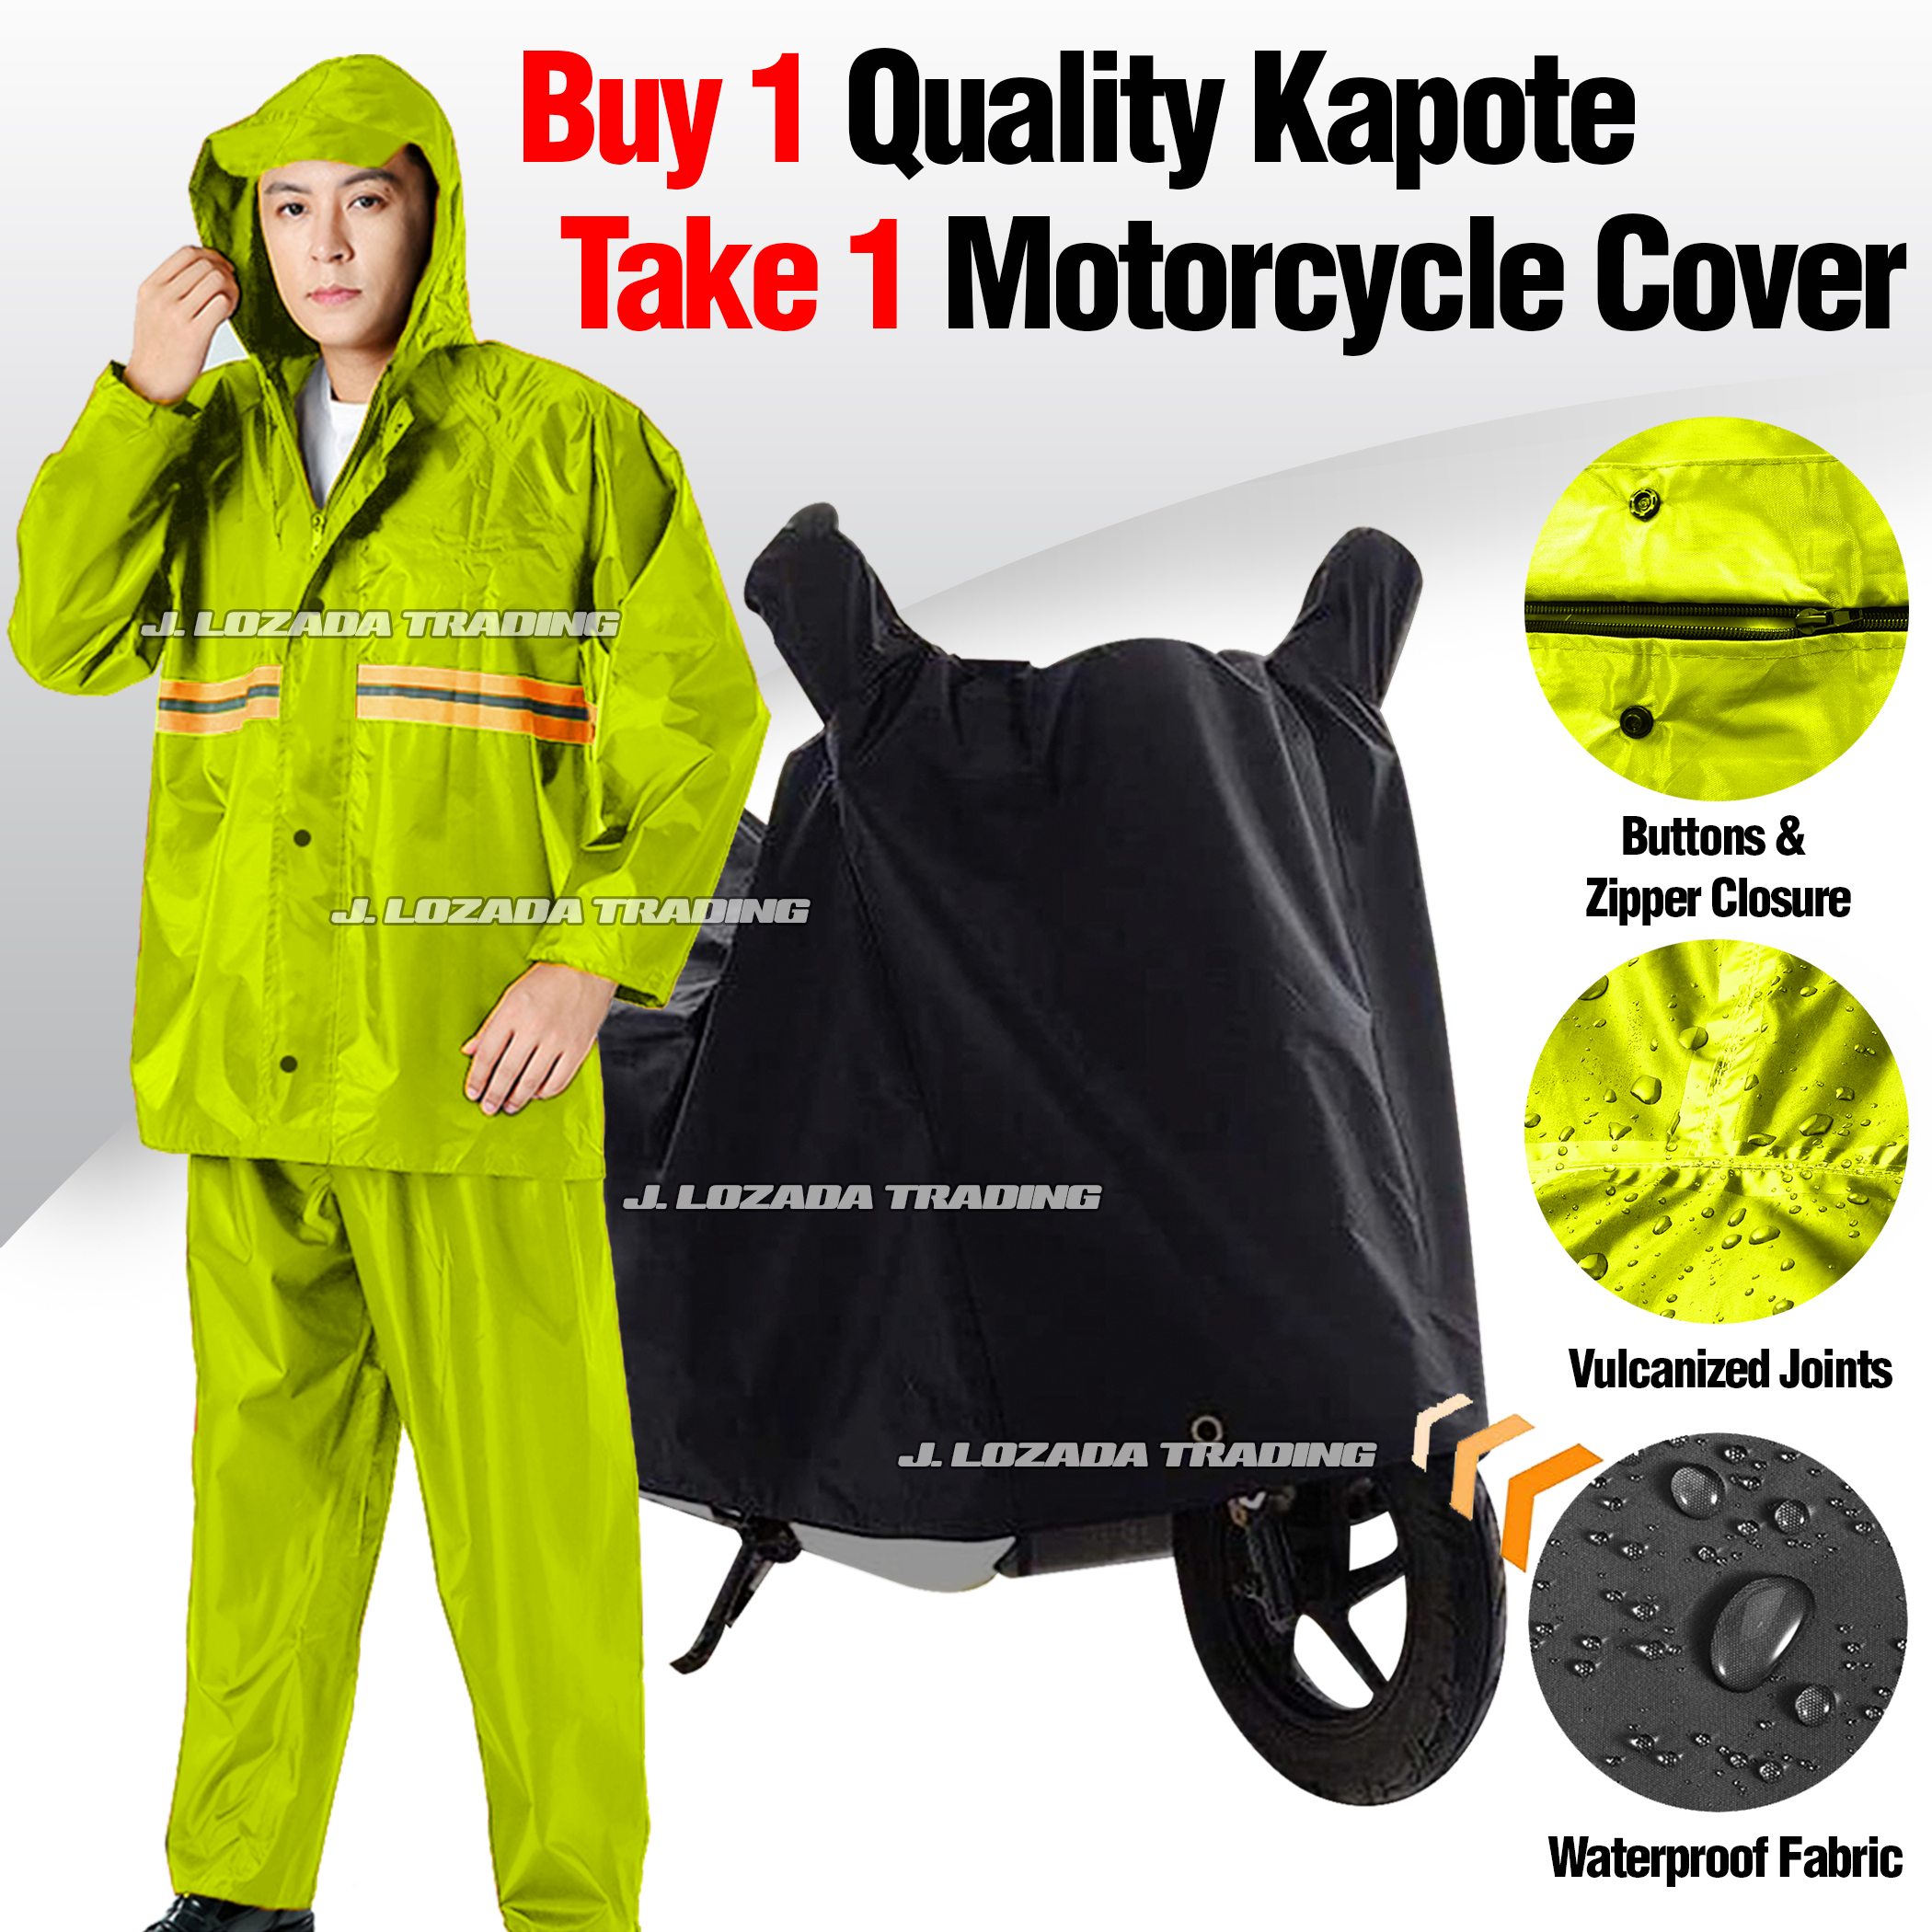 HIGH QUALITY RAINCOAT WITH MOTORCYCLE COVER, KAPOTE, VULCANIZE STITCH ...